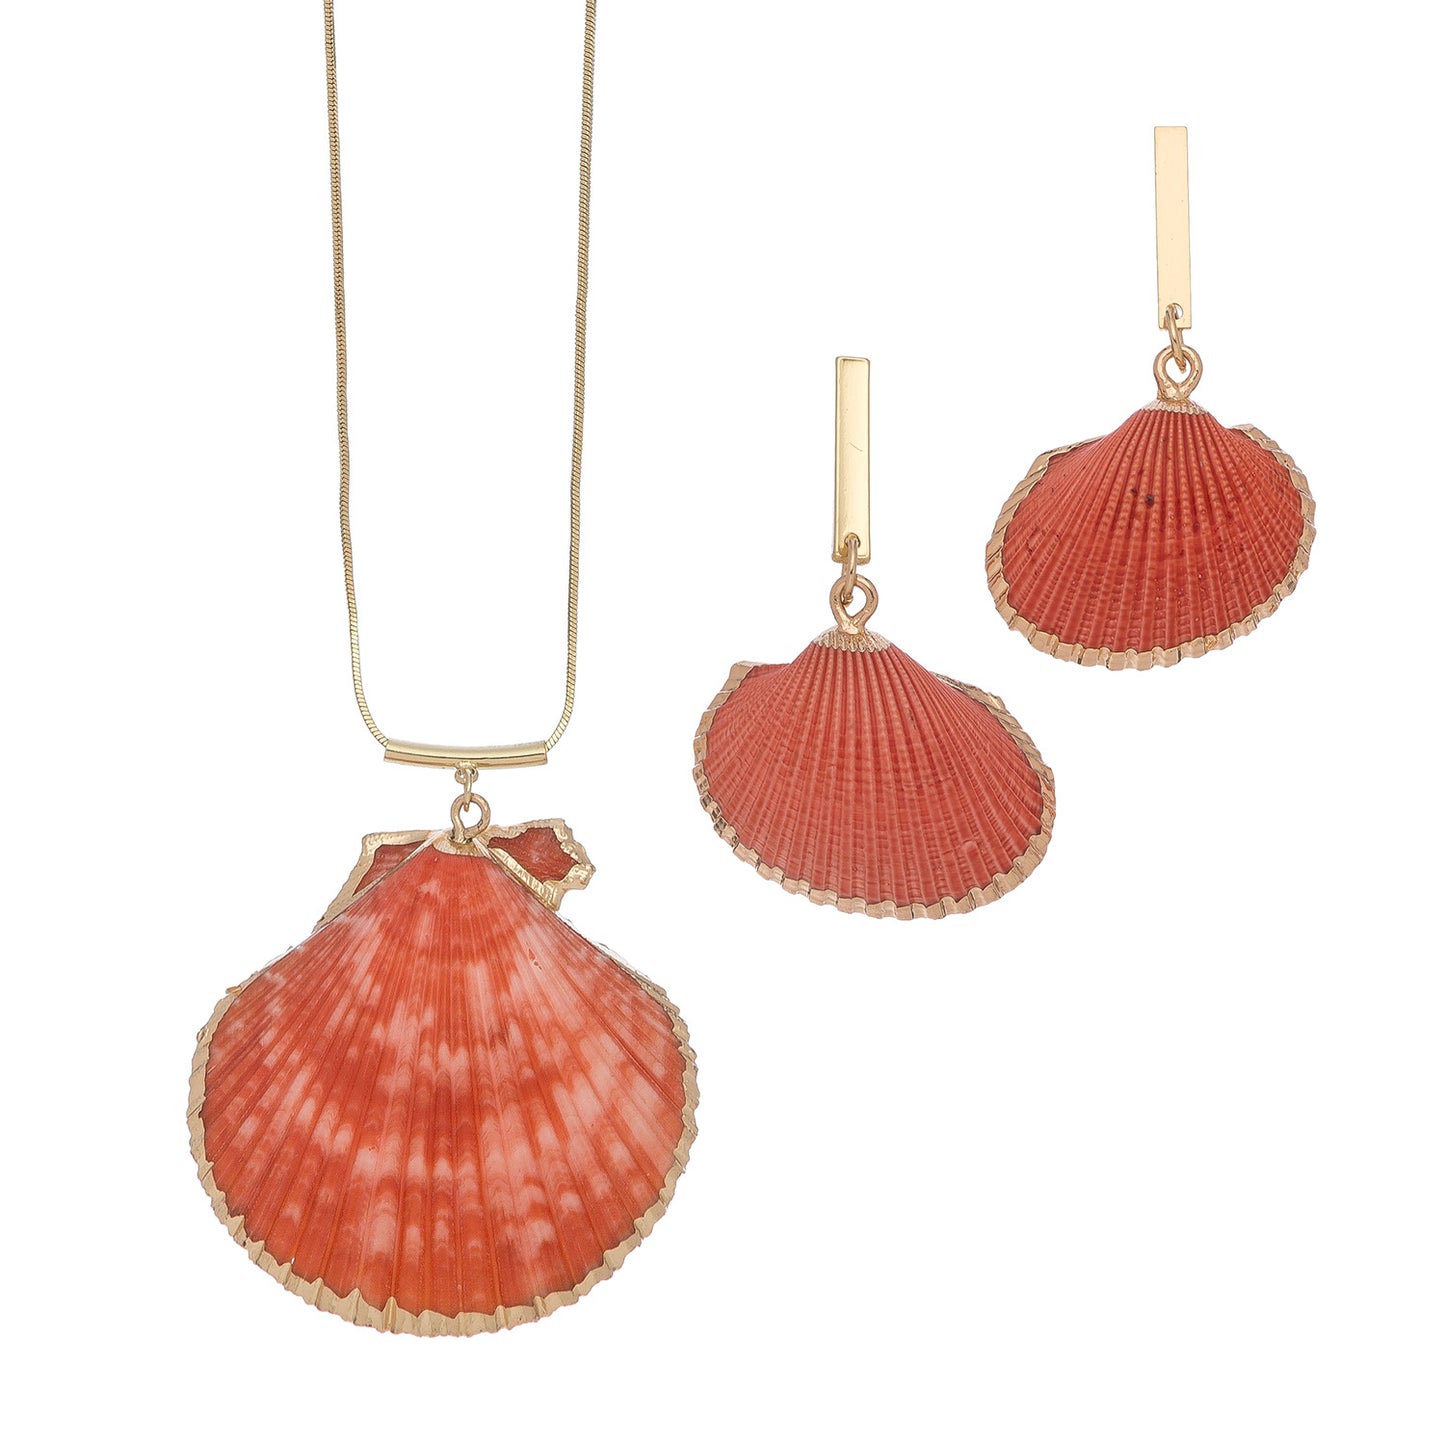 Gold Dipped Genuine Shell Necklace and Earring Set